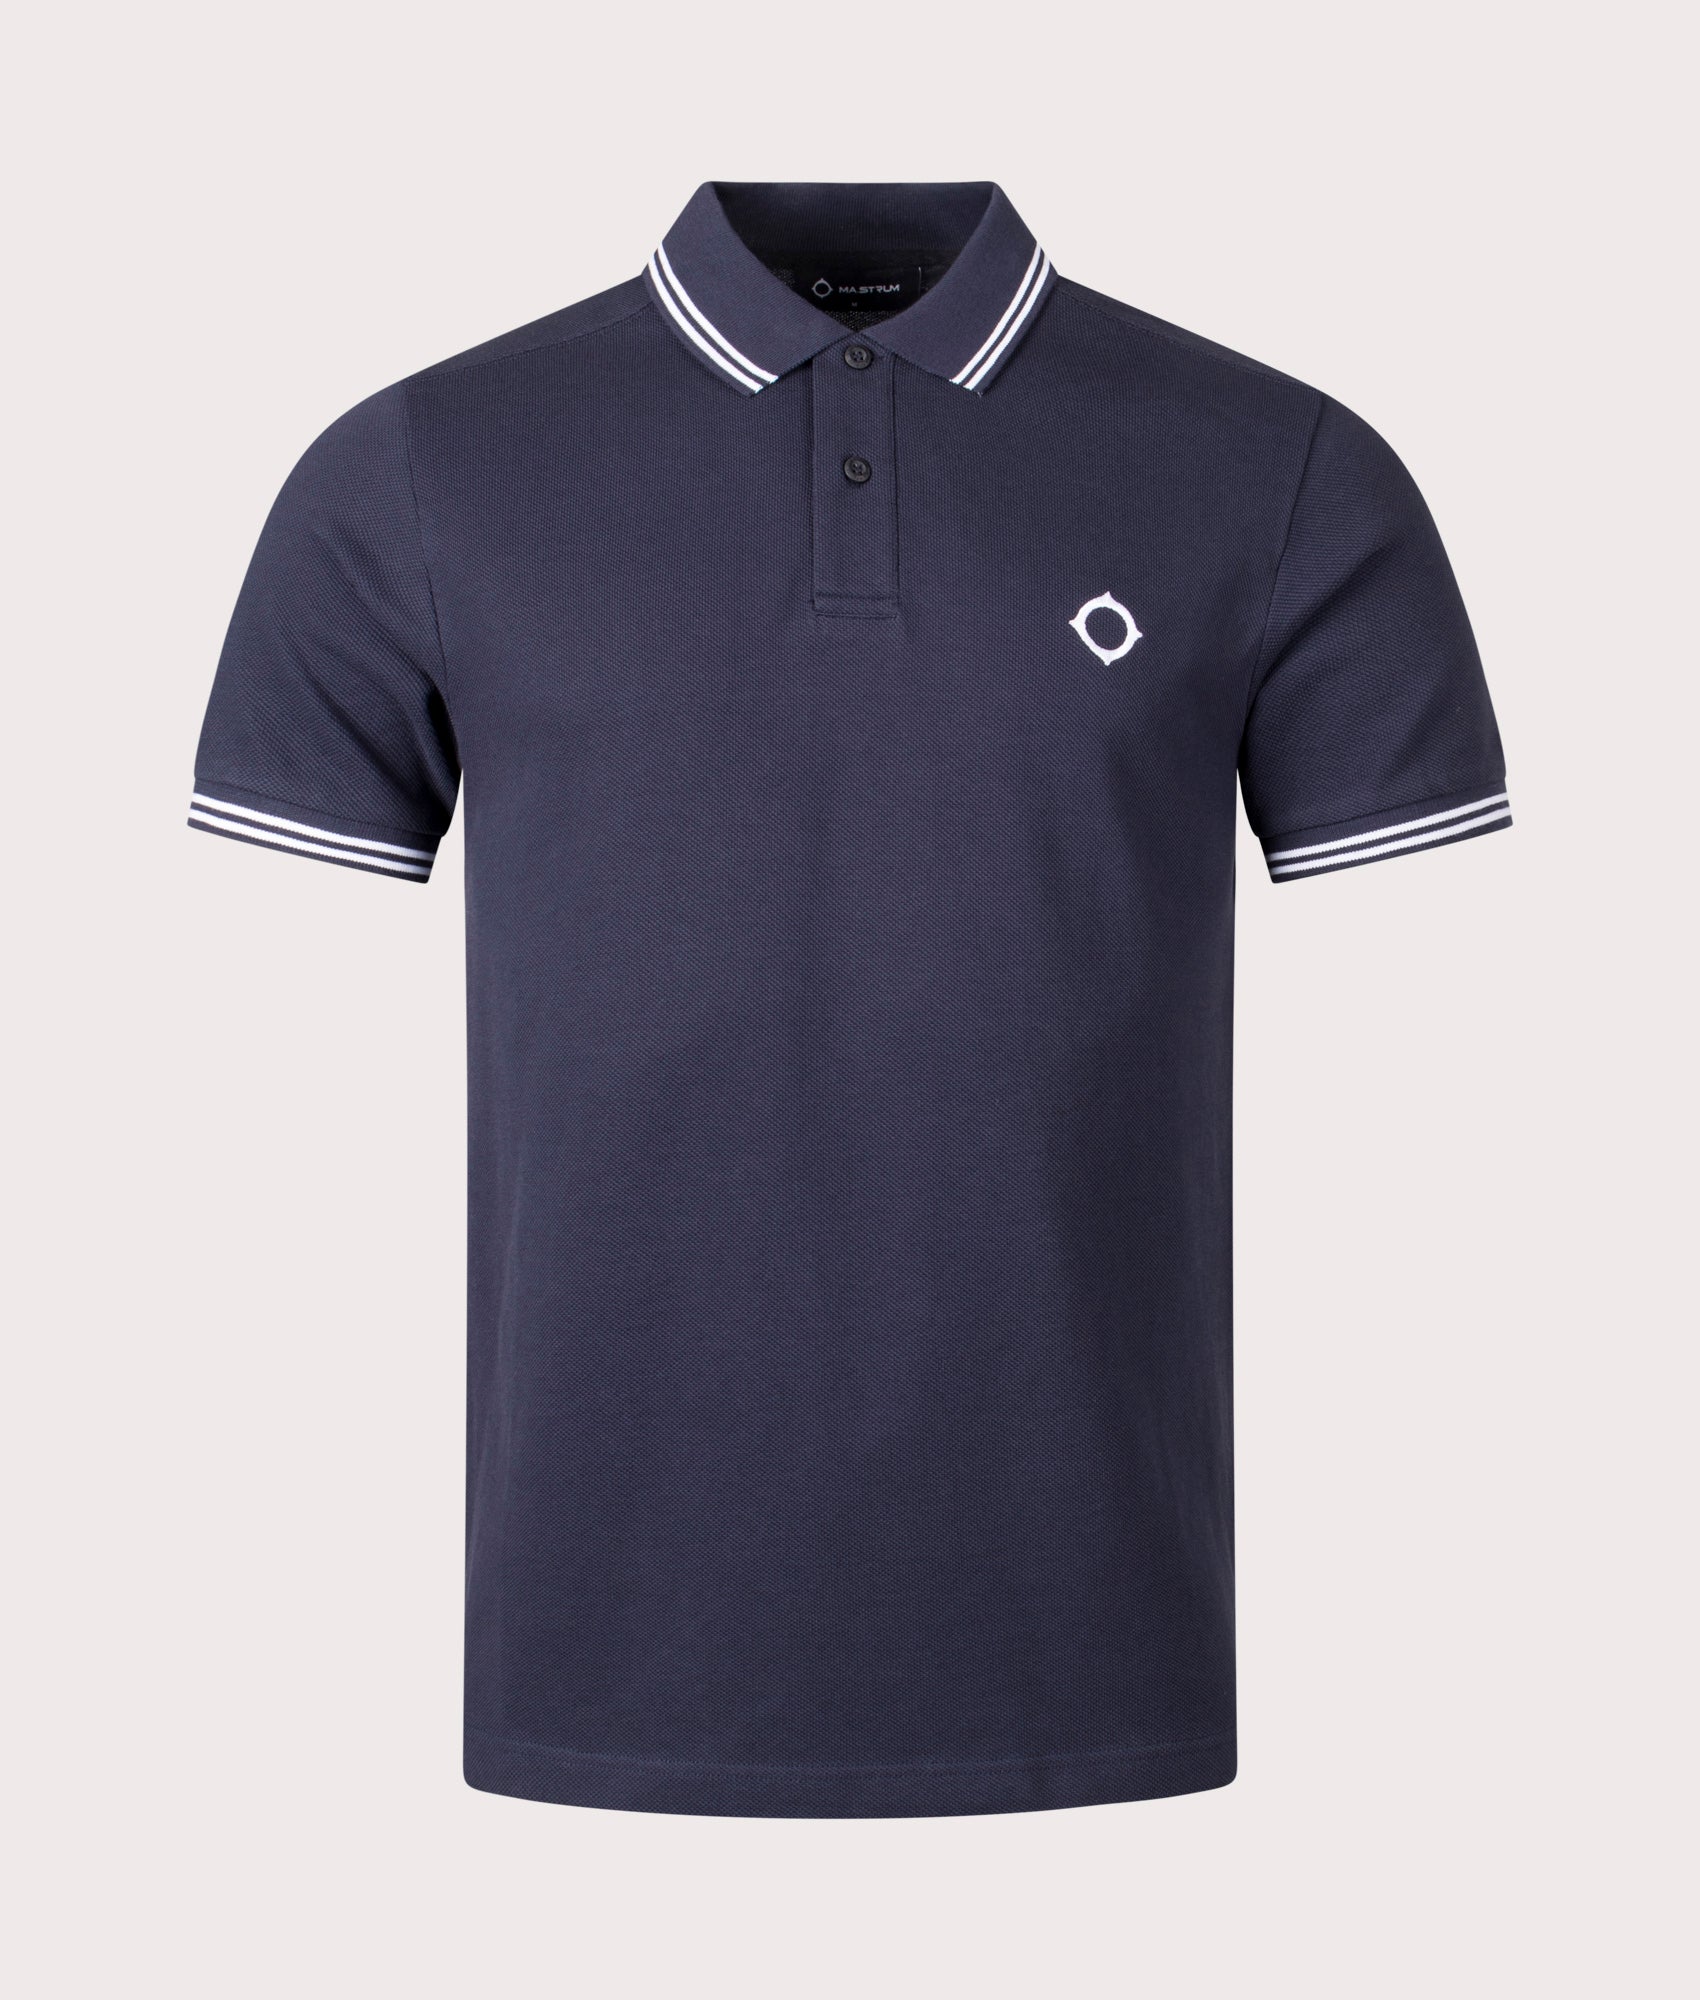 MA.Strum Mens Double Tipped Polo Shirt - Colour: M428 Ink Navy - Size: Medium